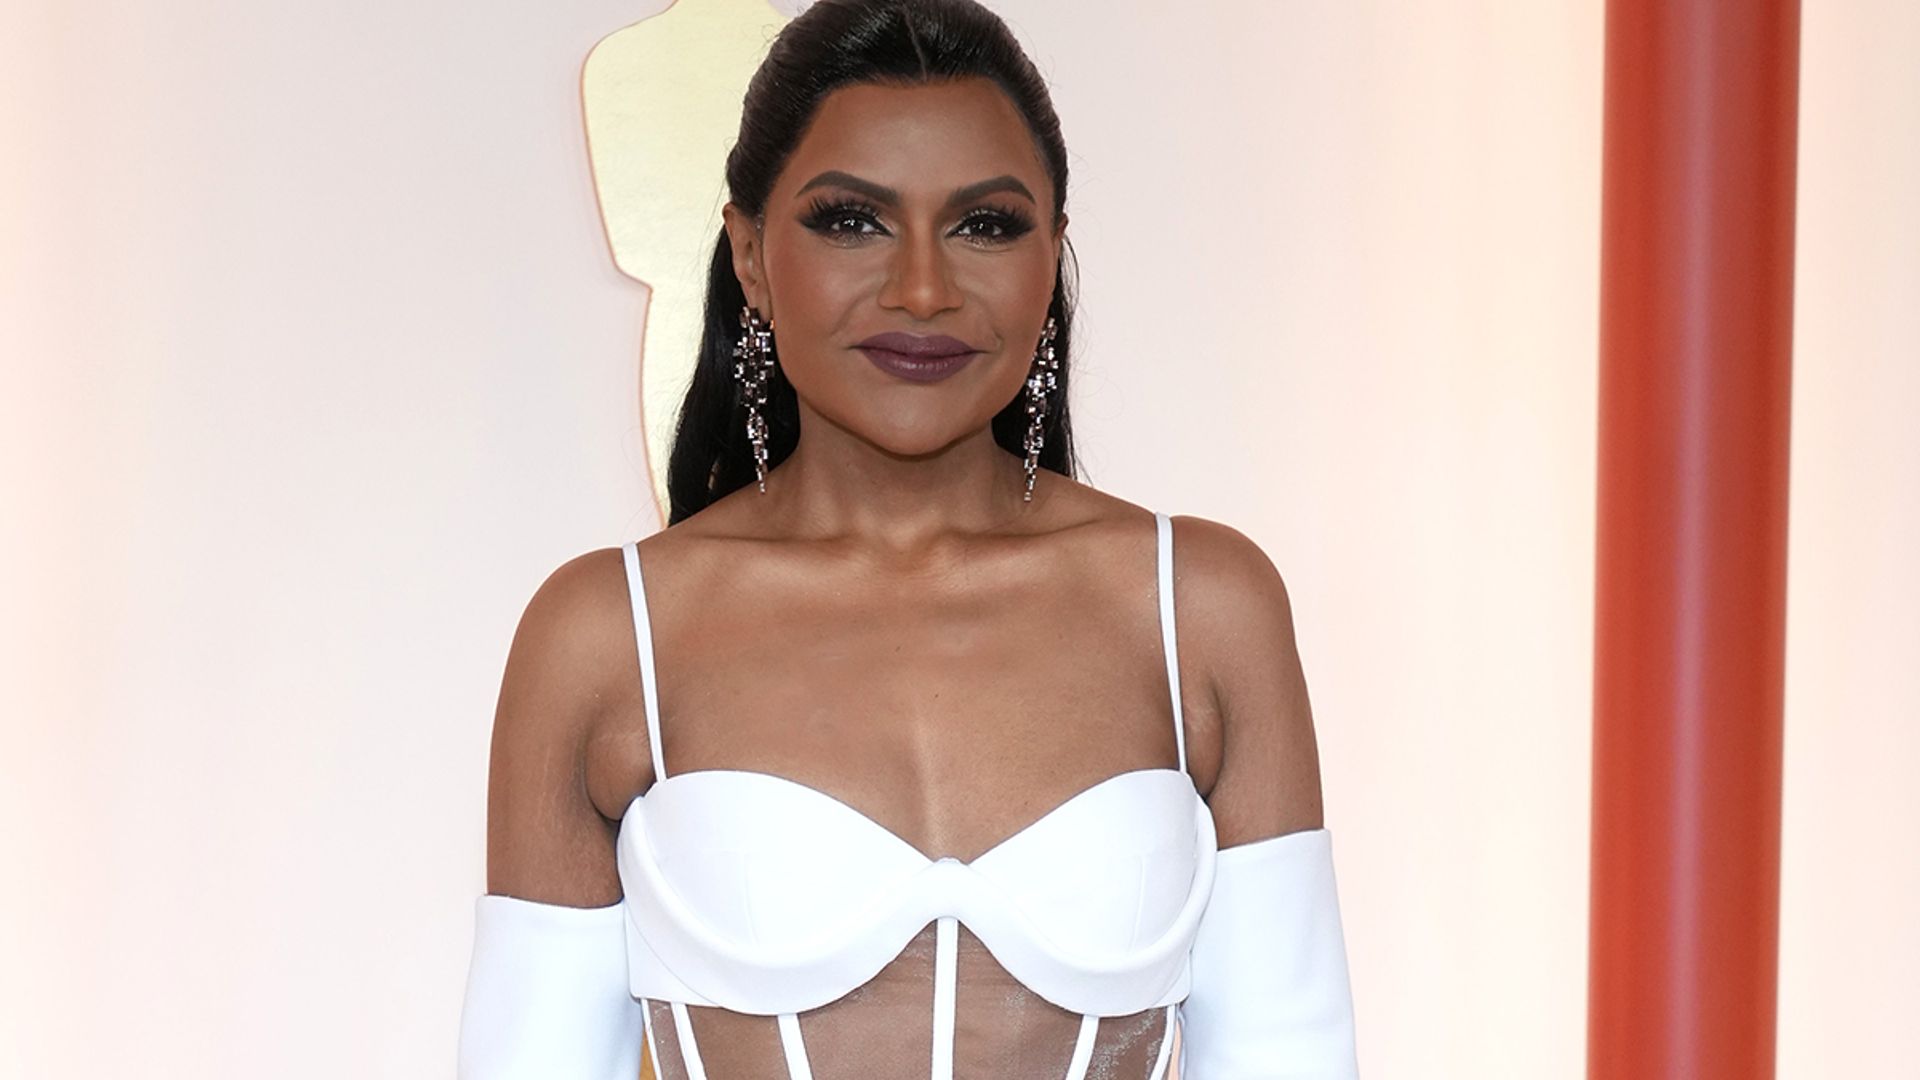 Mindy Kaling teases her upcoming wedding after dazzling in white gown